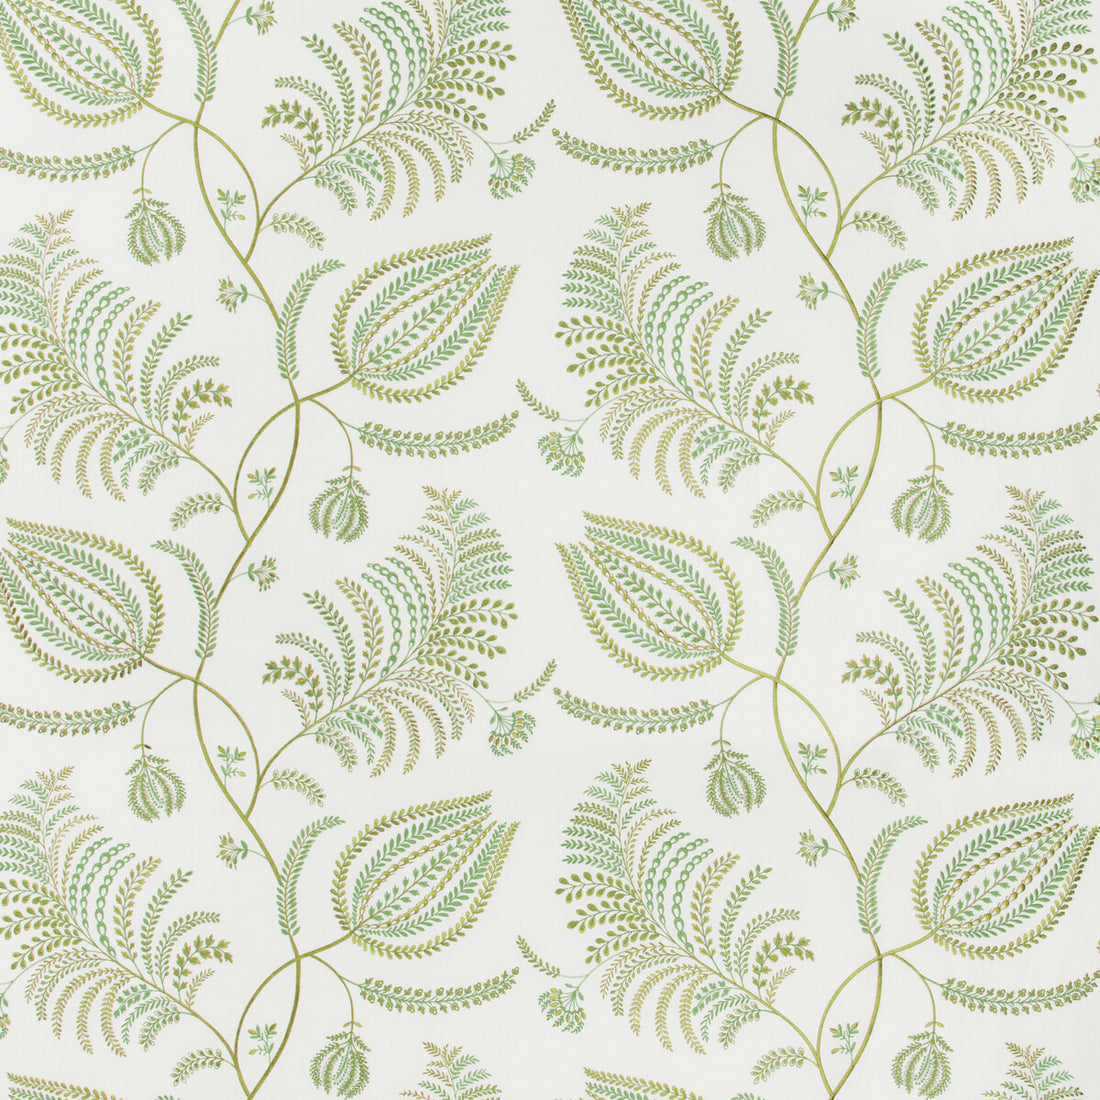 Palmero Emb fabric in ivory/leaf color - pattern 2017158.23.0 - by Lee Jofa in the Westport collection